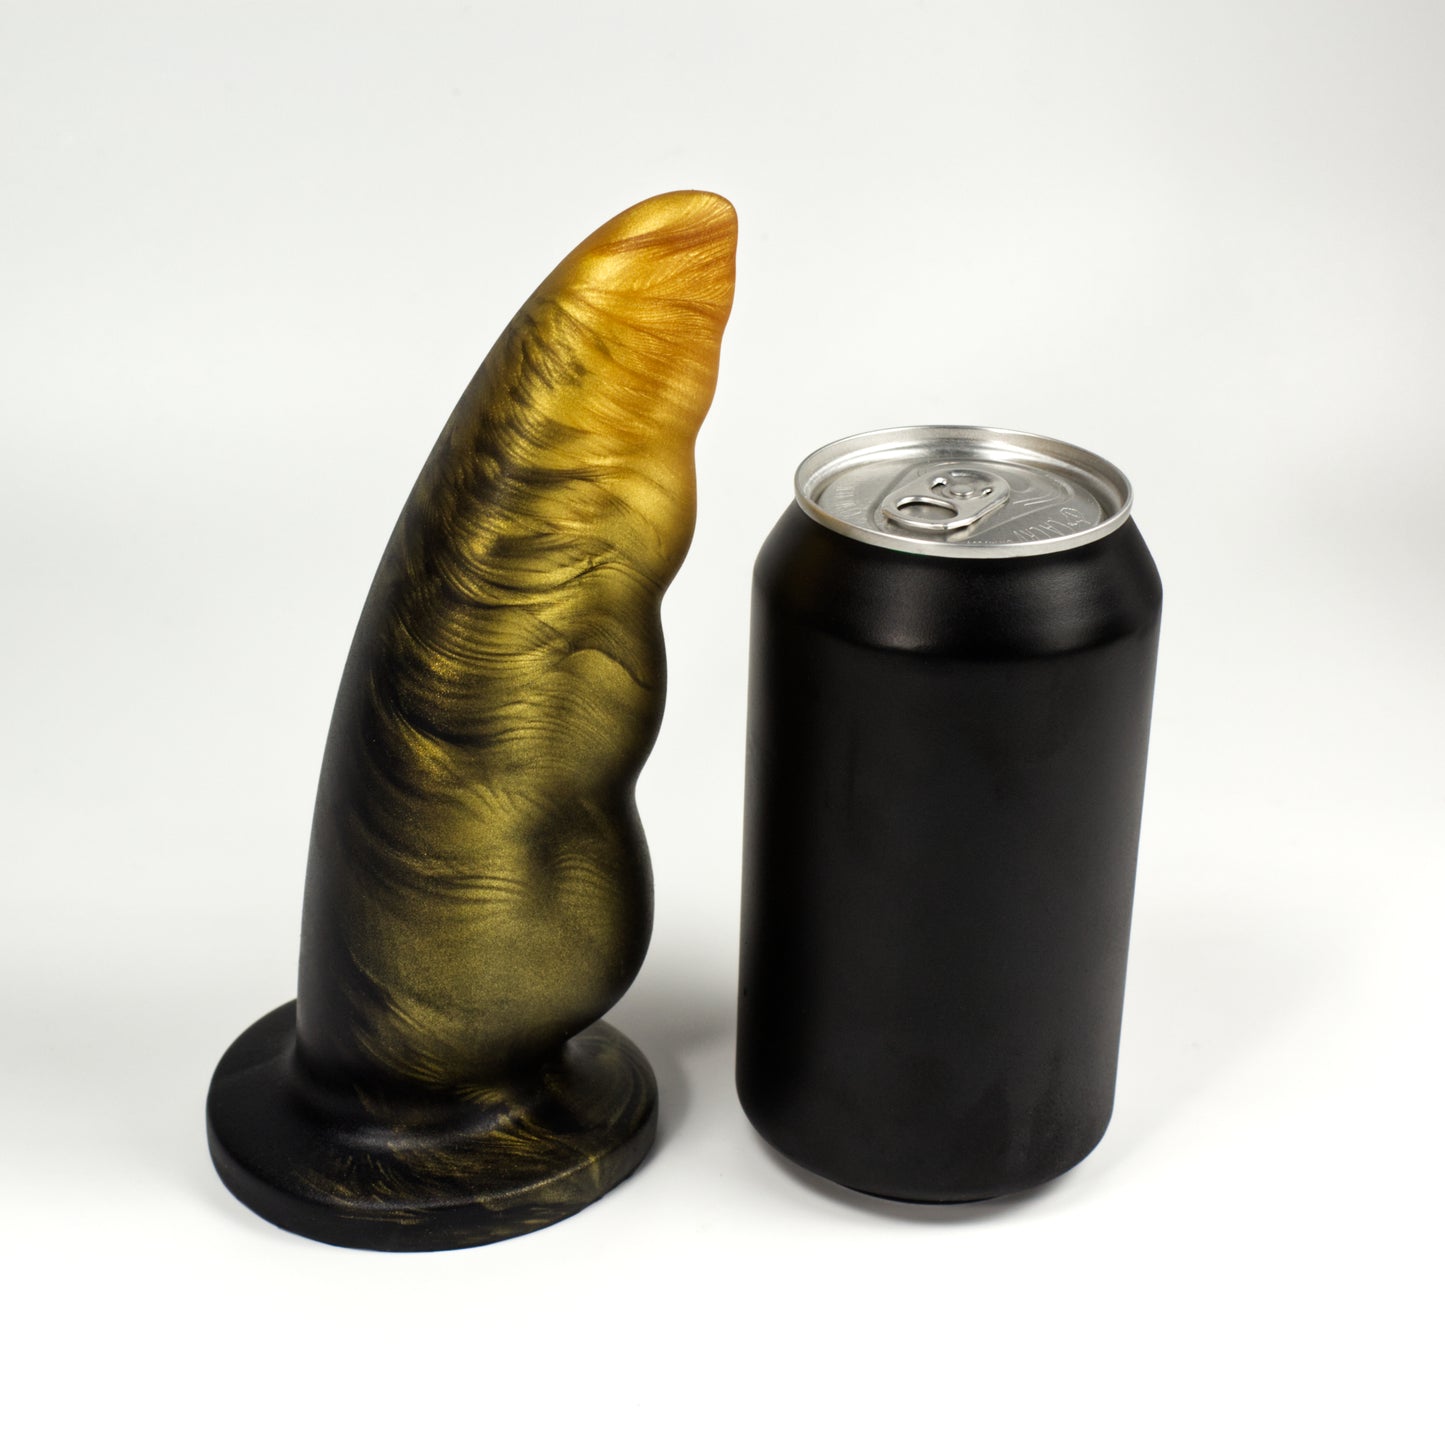 Side view of the Familiar next to a standard soda can, showing that the dildo is a few inches taller and tapers from about the same width as the can to about a quarter of its width.